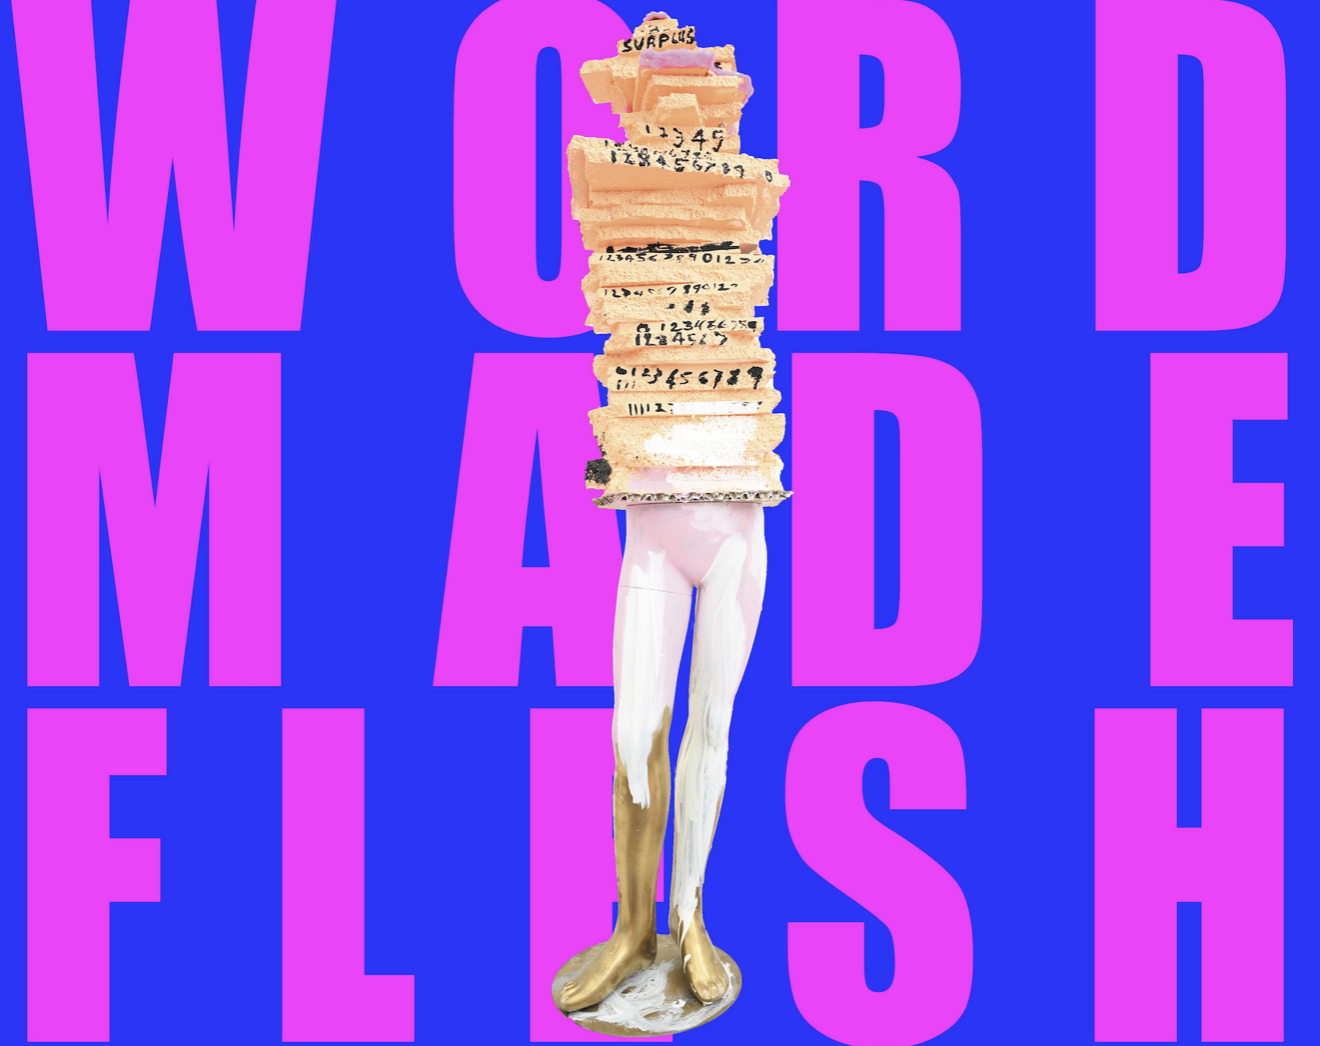 Word Made Flesh @ and ACCA